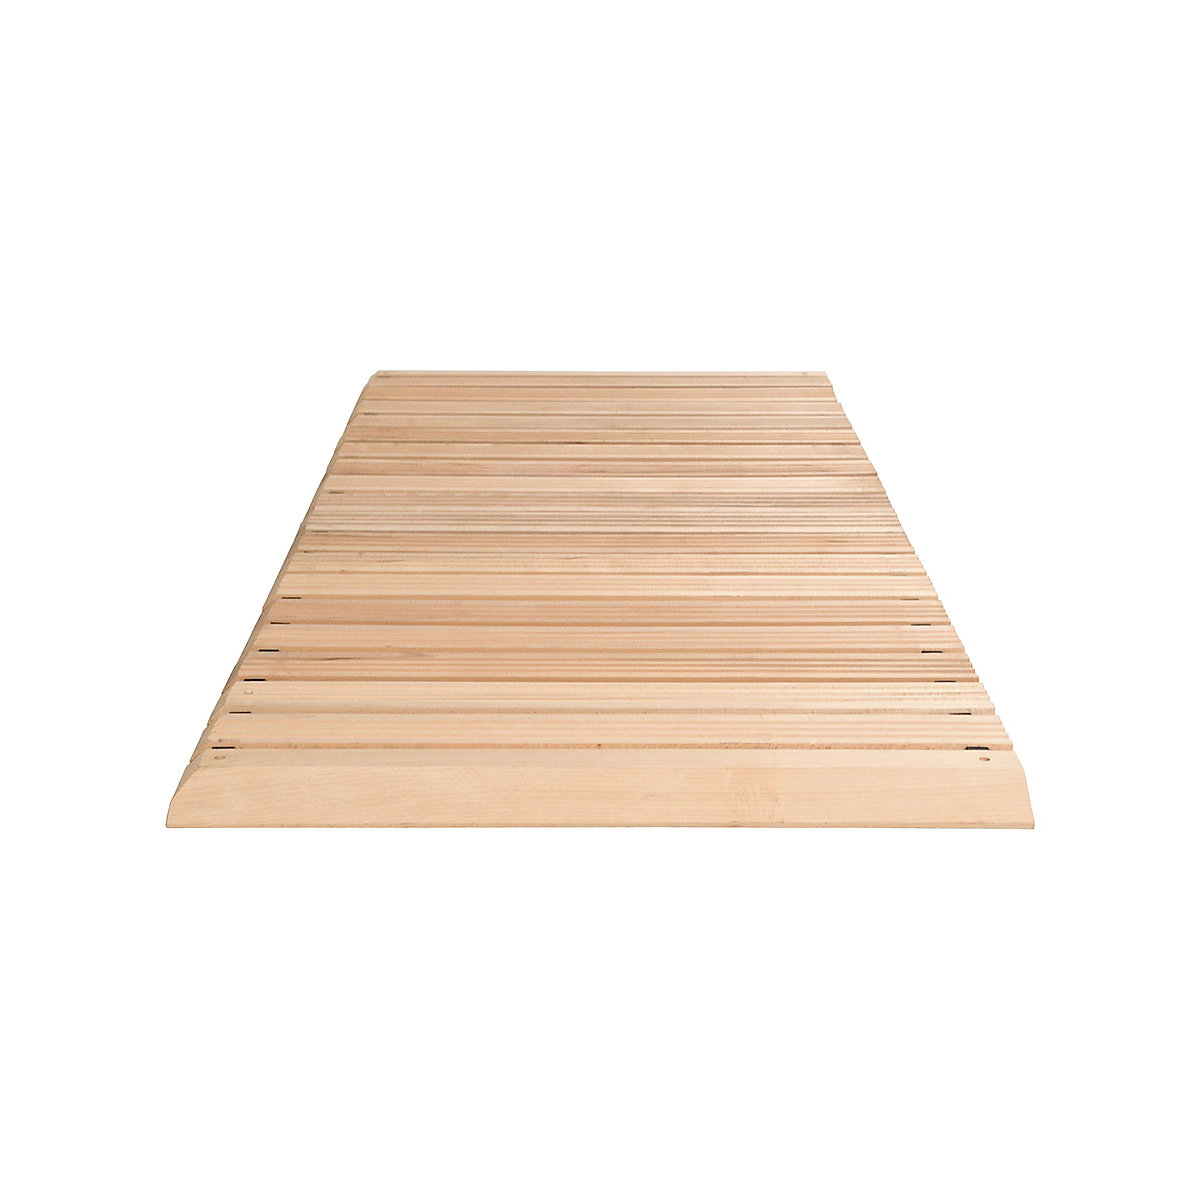 Wooden safety grid, per metre, with bevelled edges on 3 sides, width 800 mm